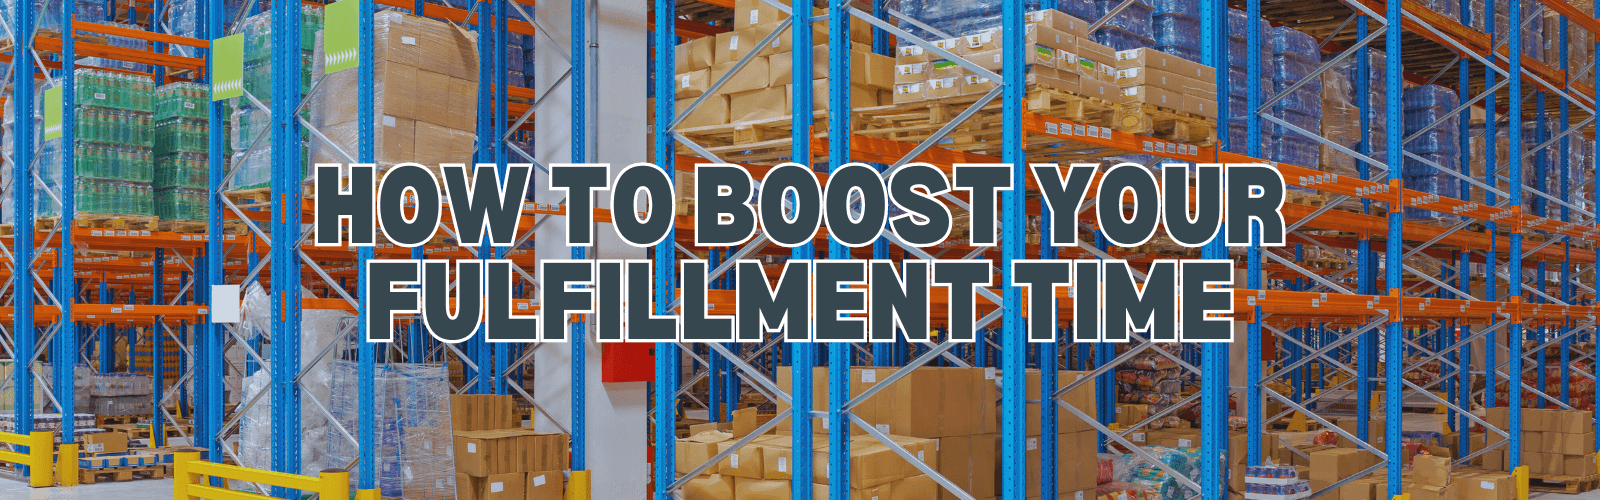 How to Boost Your Fulfillment Time